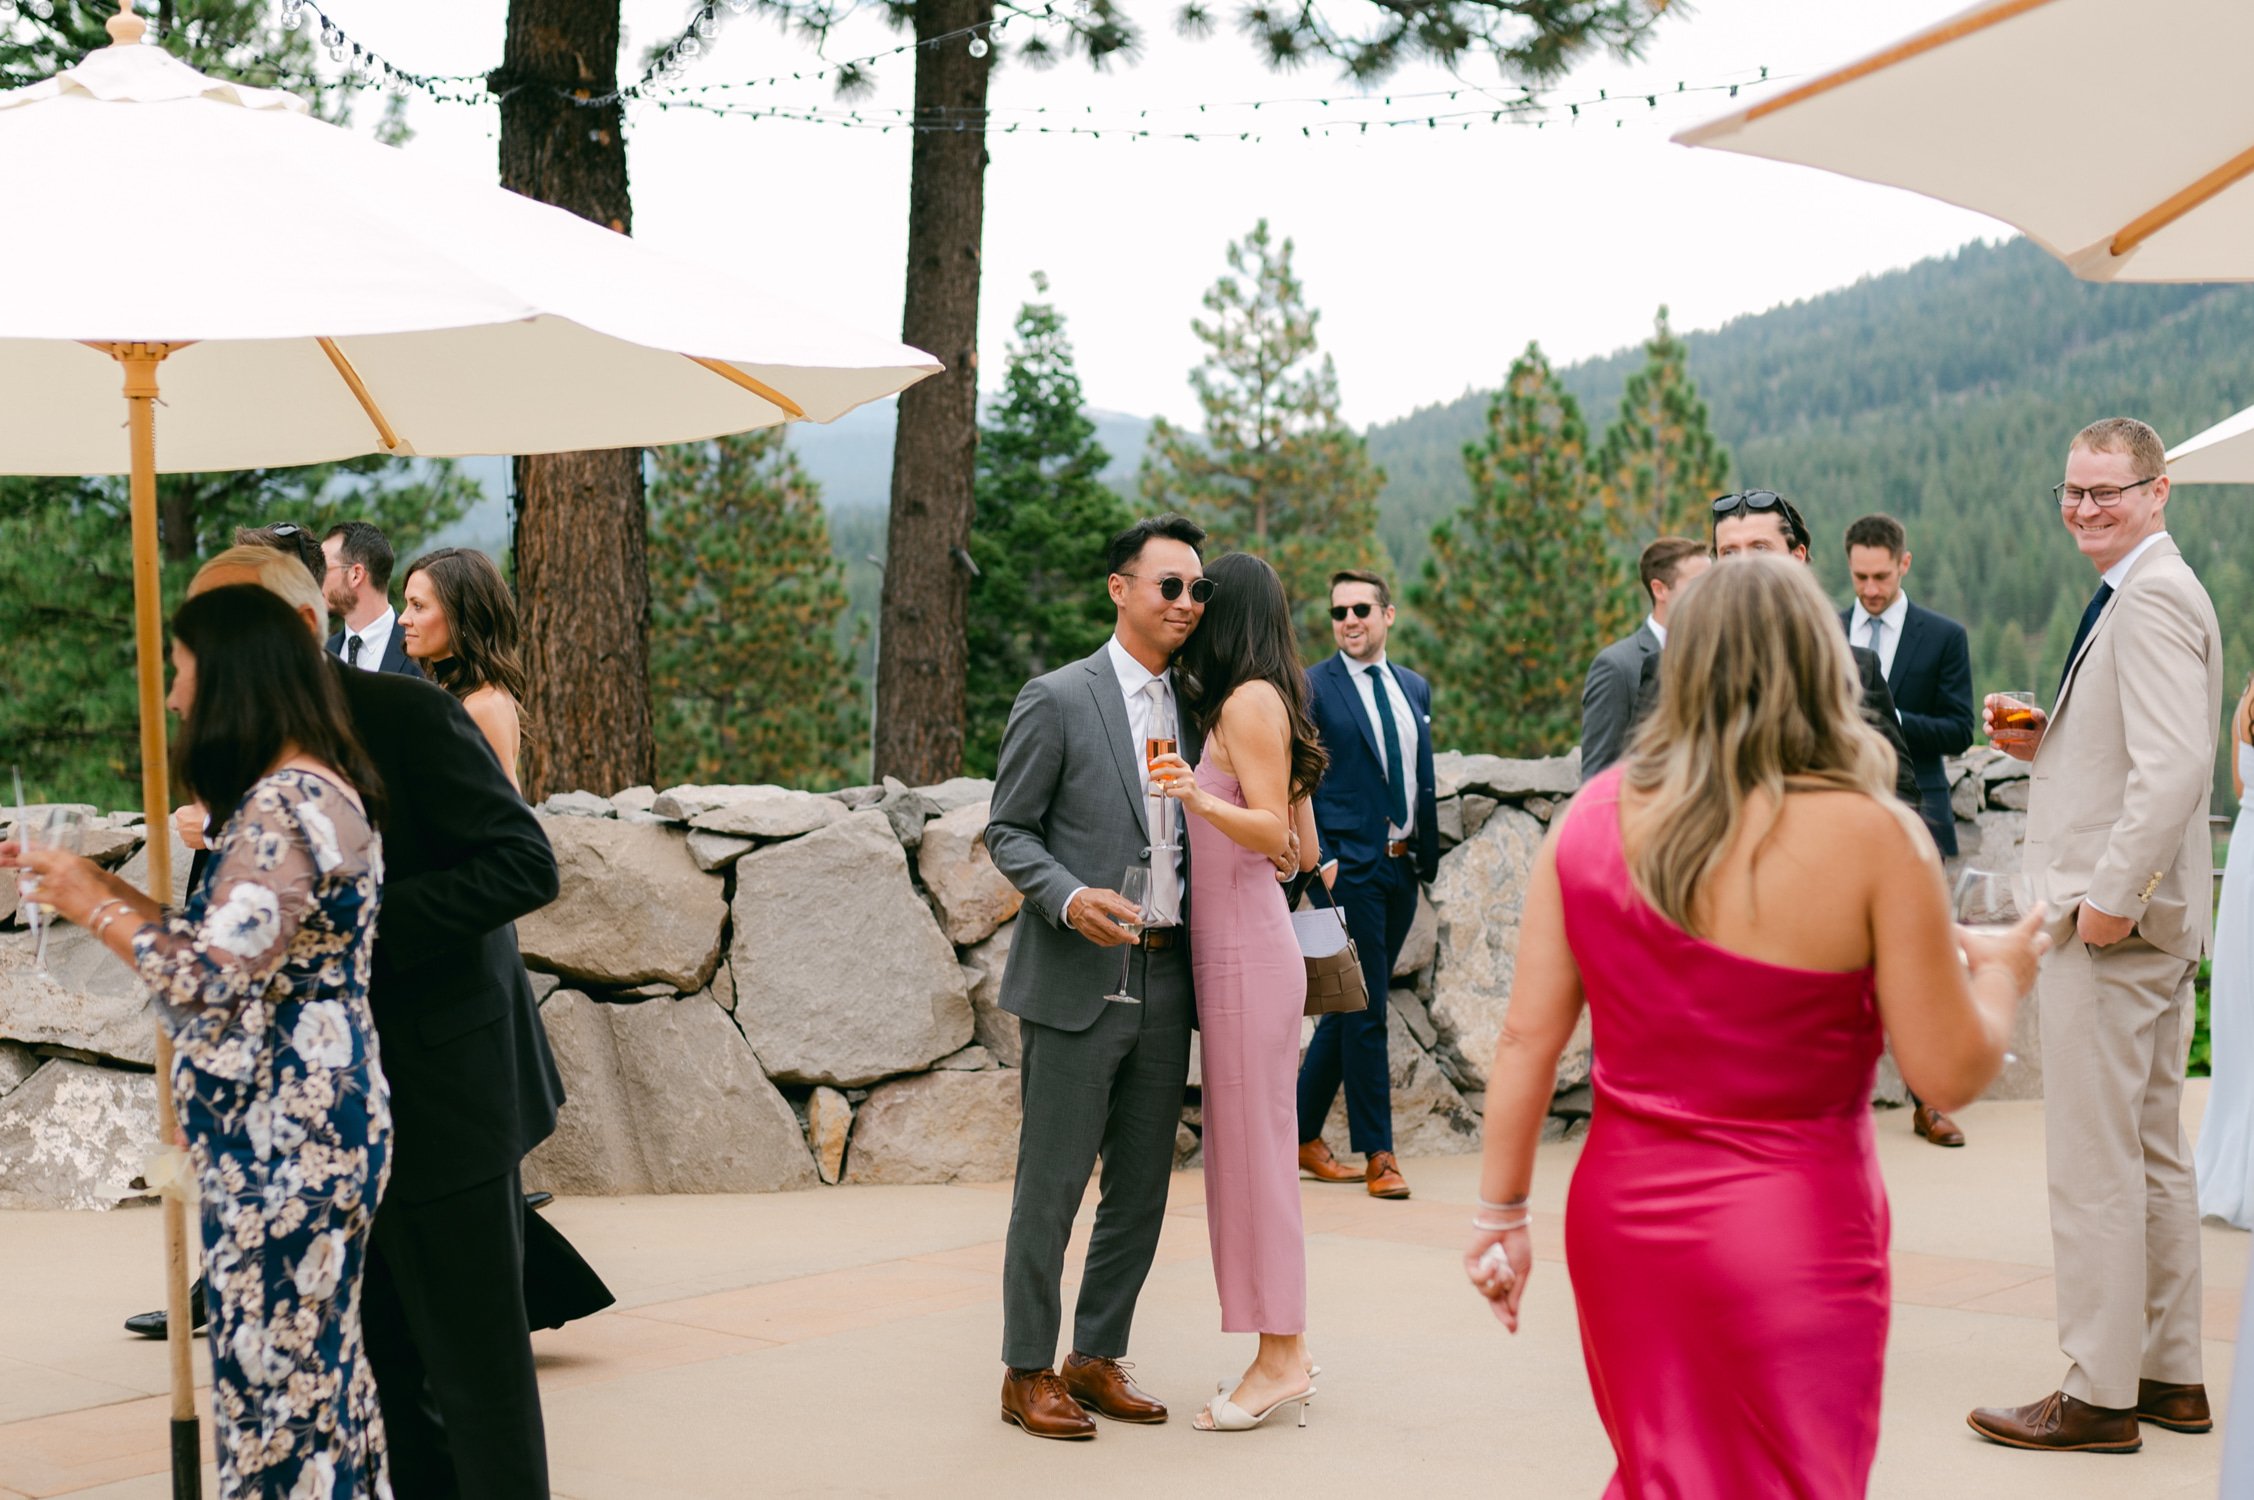 Martis Camp Wedding, photo of the guests enjoying during the cocktail hour